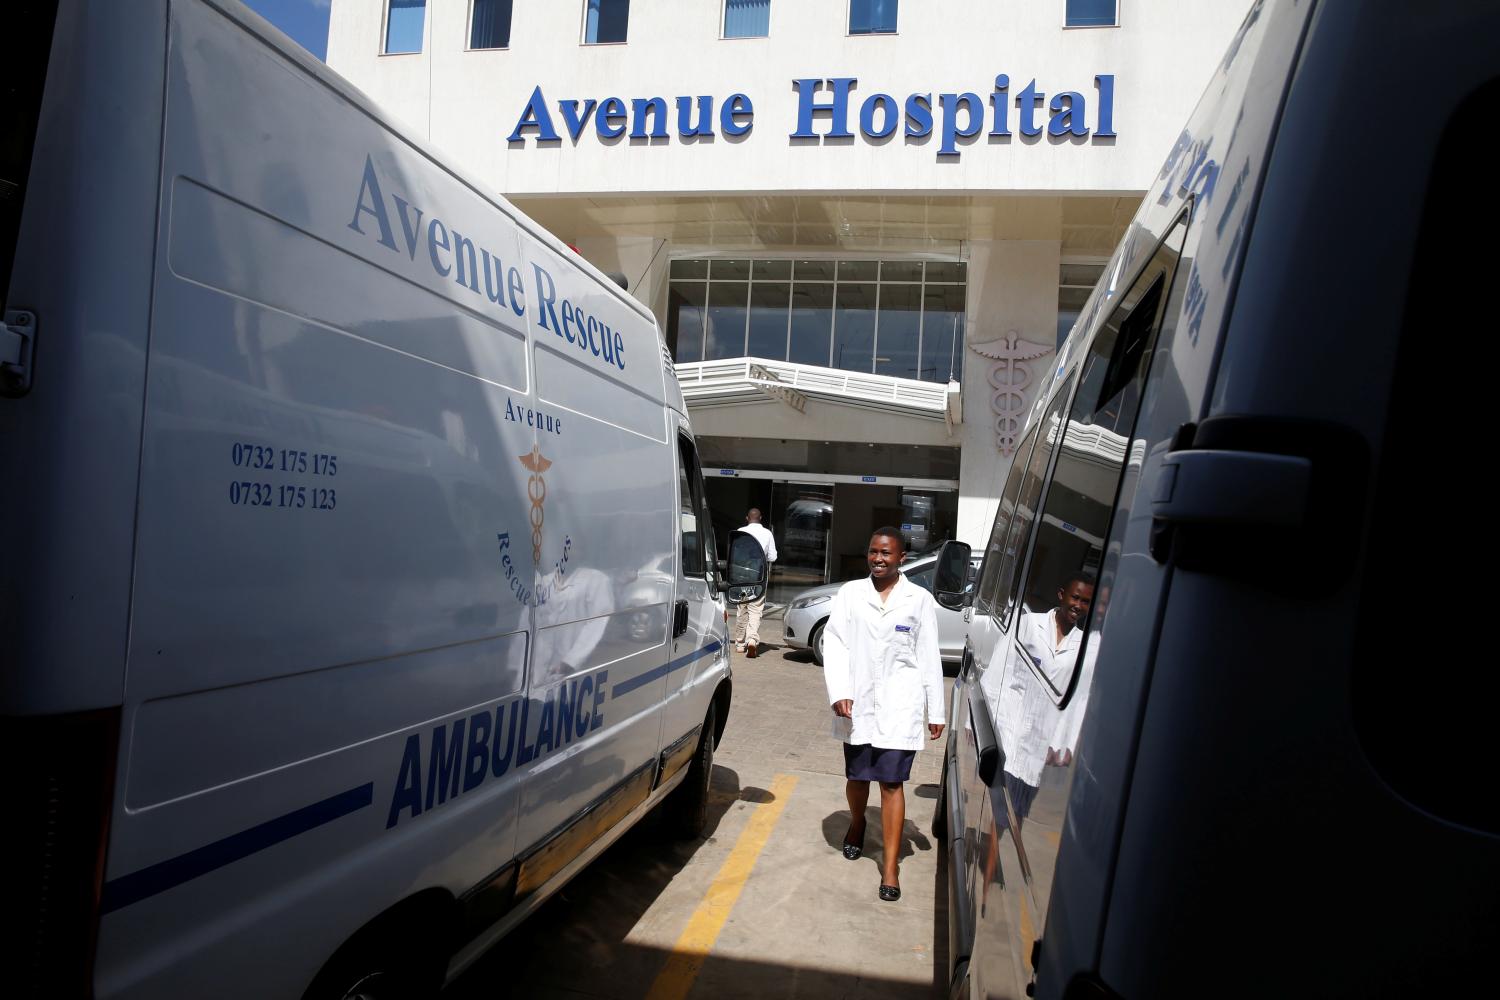 A health worker walks between parked ambulances at the Avenue hospital in Nairobi, Kenya February 1, 2019. Picture taken February 1, 2019. REUTERS/Baz Ratner - RC15F30A3BC0